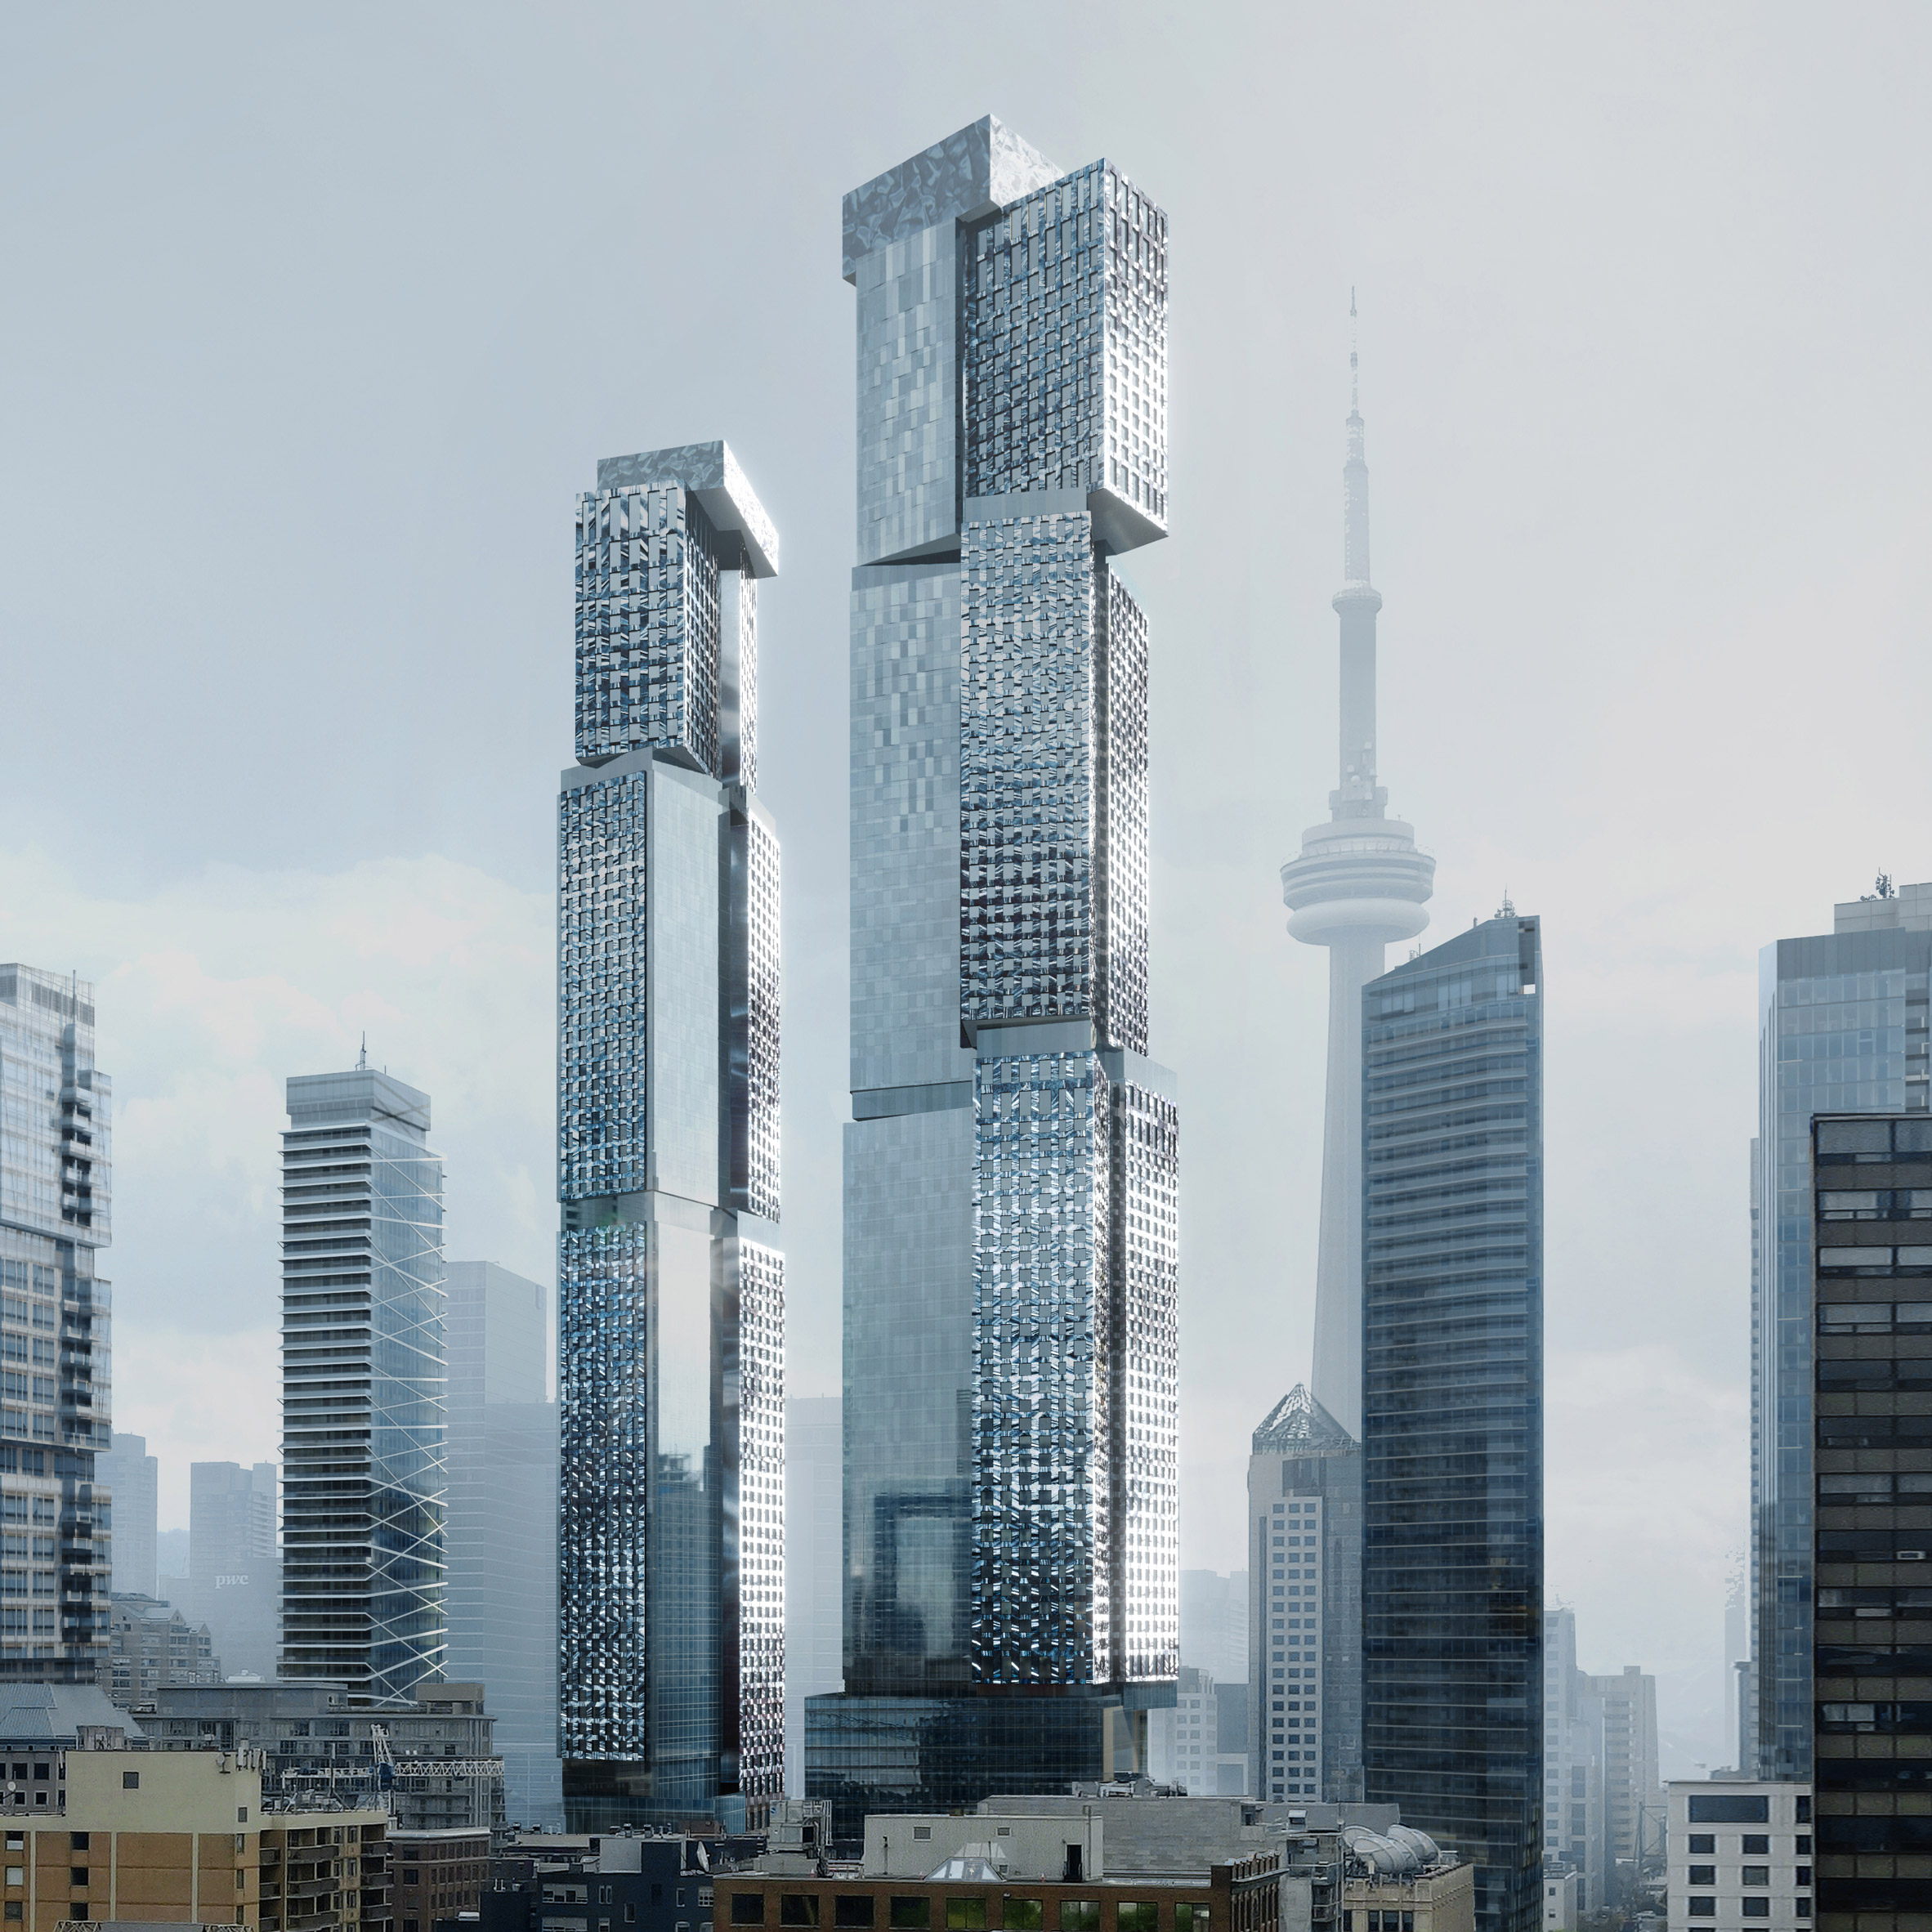 Frank Gehry Reveals Latest Designs For Skyscrapers In Toronto